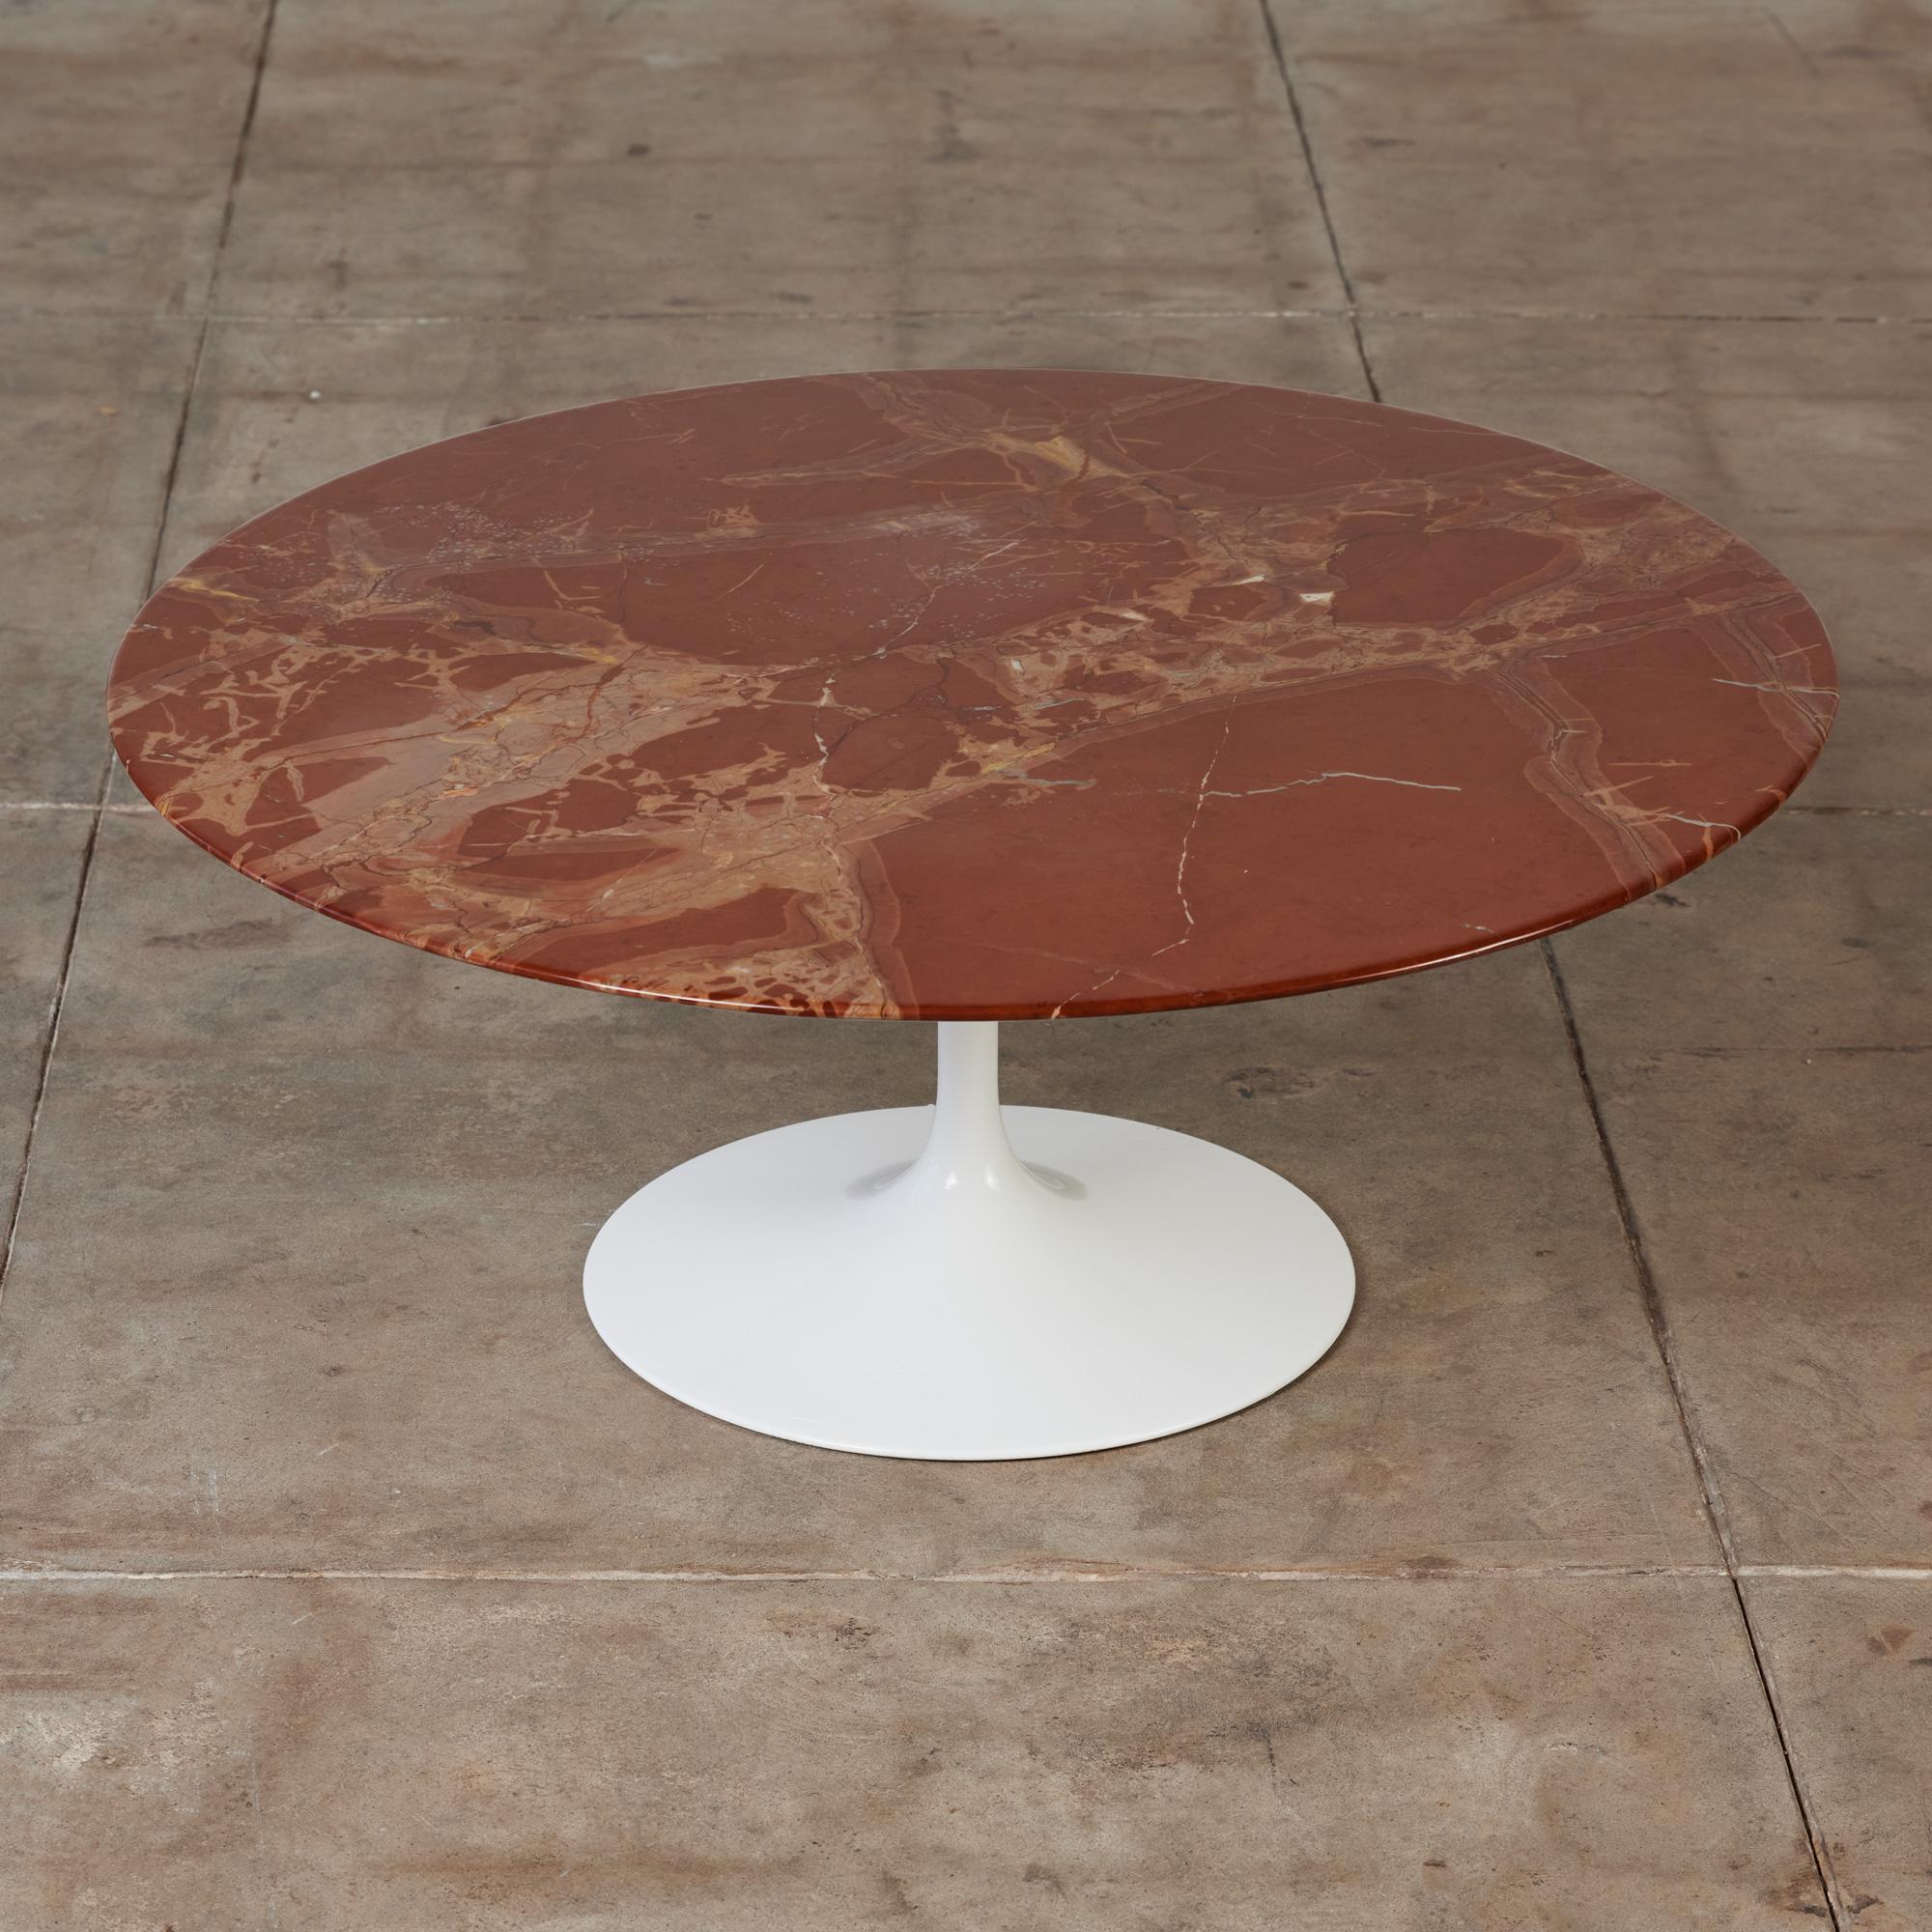 The tulip table is one of Saarinen’s most iconic designs for Knoll, c.1957. This coffee table features an aluminum pedestal base and an impressive circular Russo Rubino marble top with white, cream and deep oxblood veining.

Made in